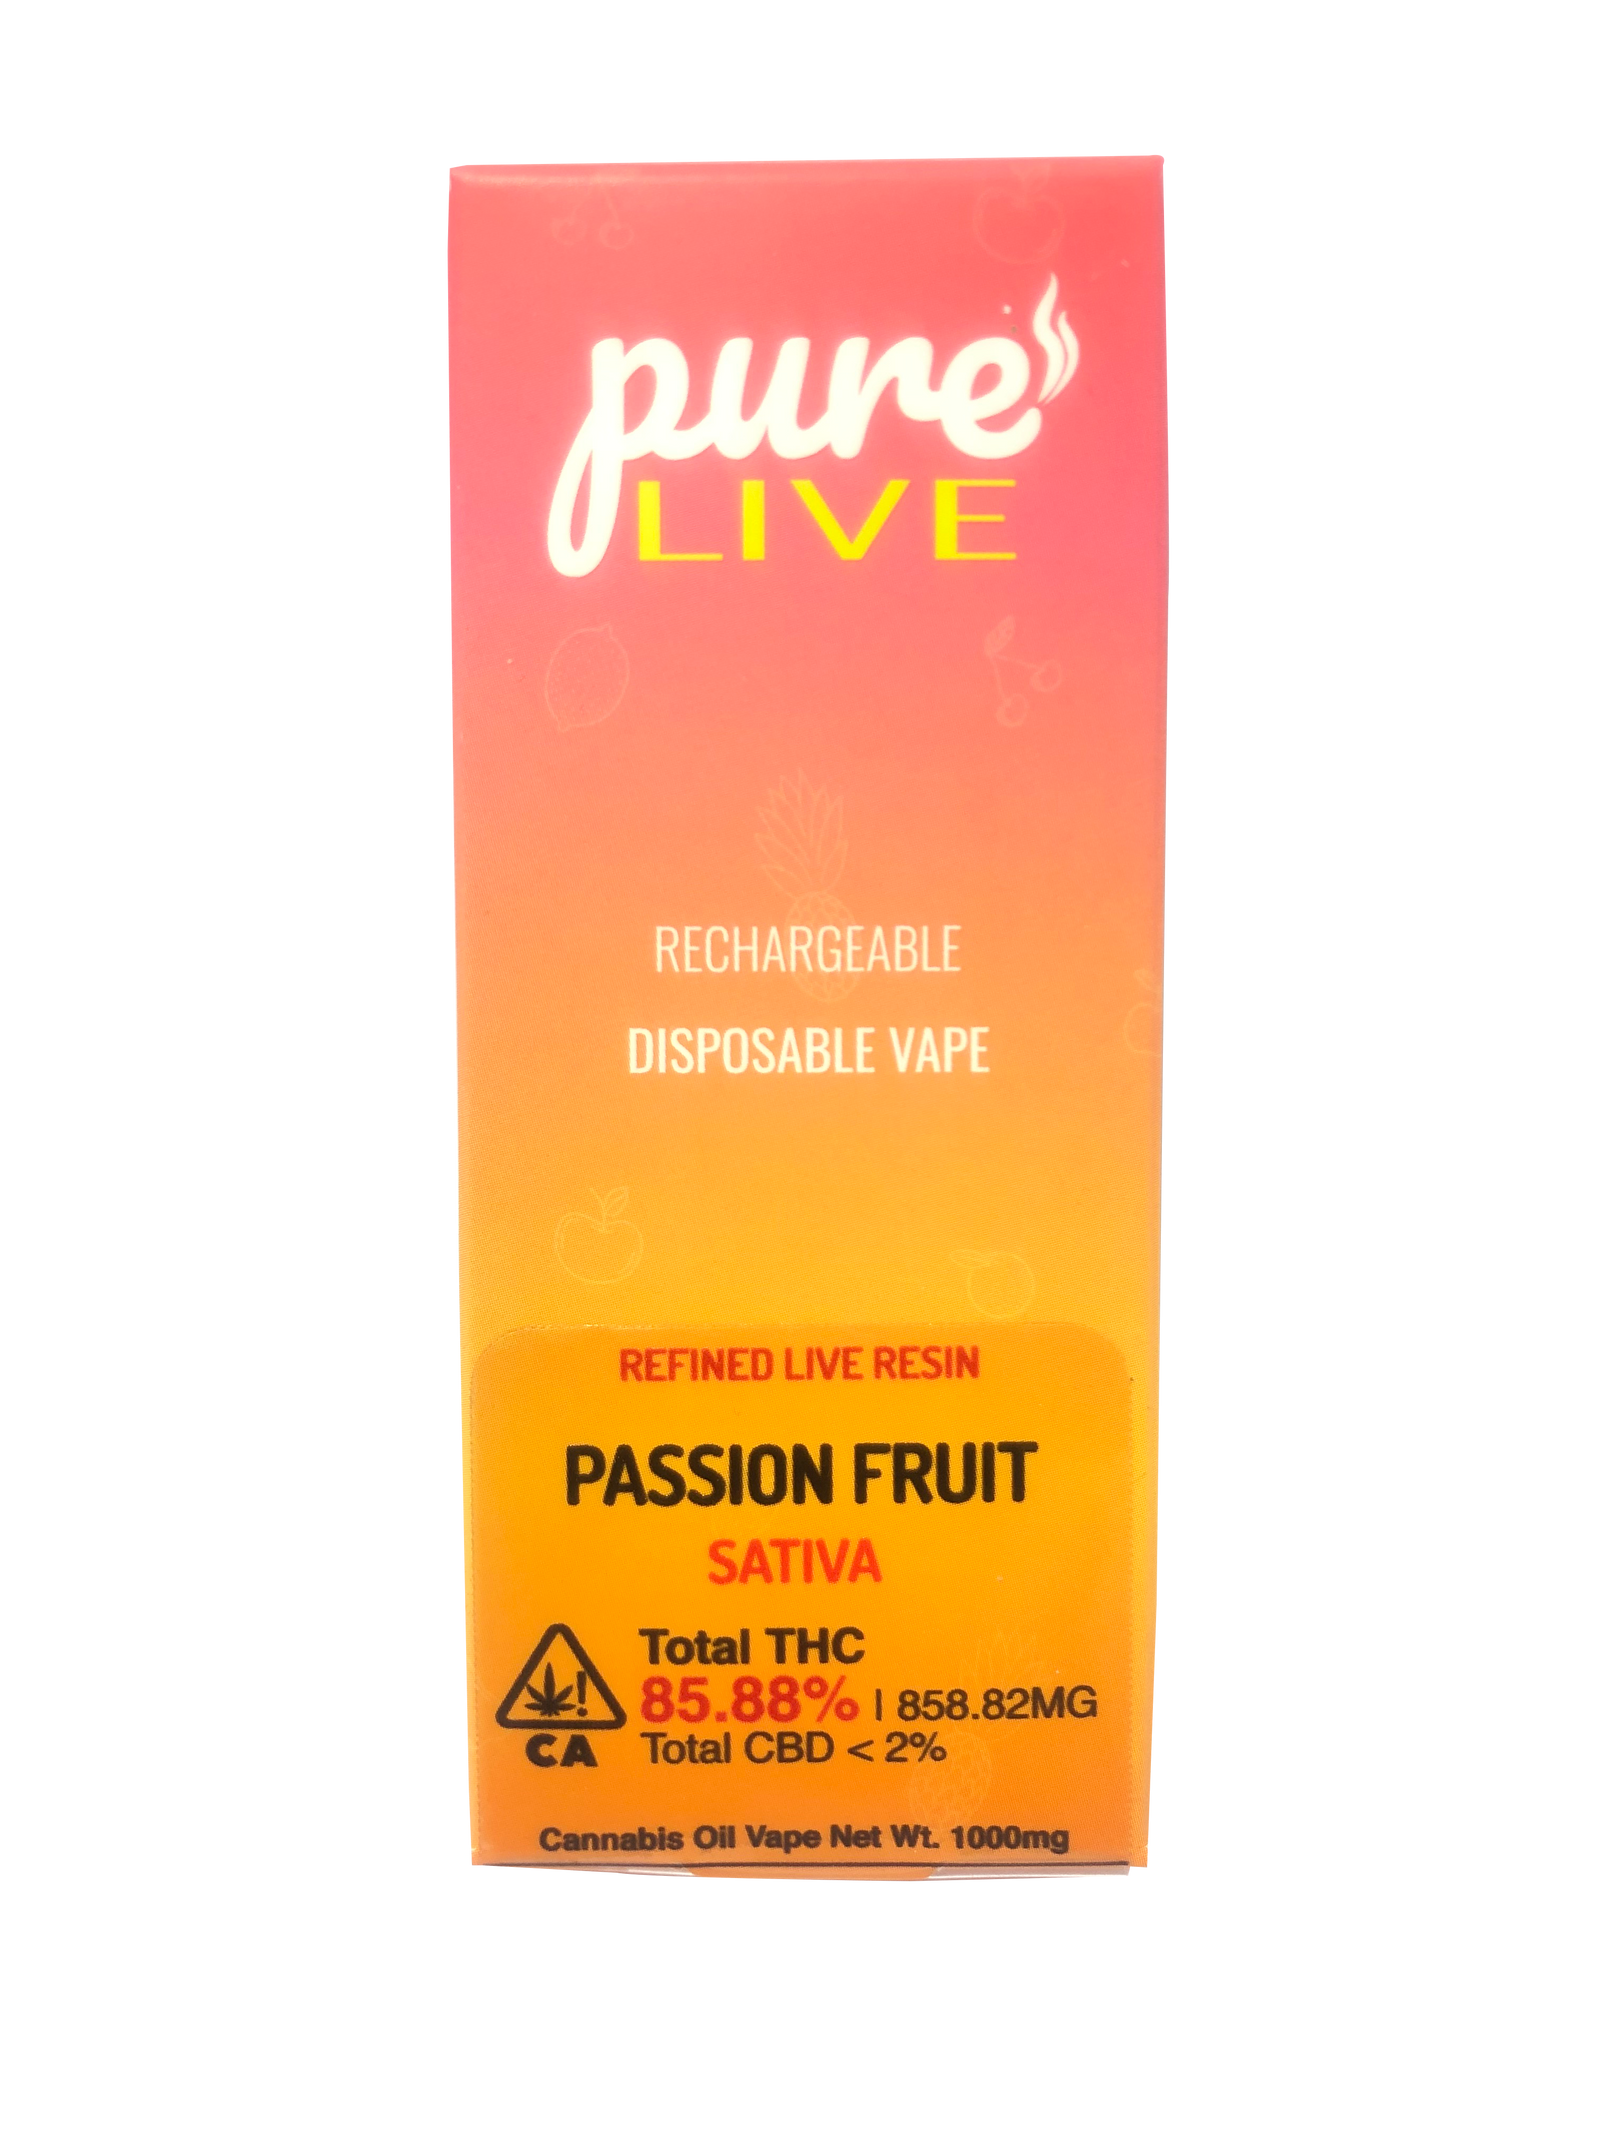 Pure Live Full Spectrum Refined Live Resin 1G Disposable Vape - Passion Fruit - The Balloon Room